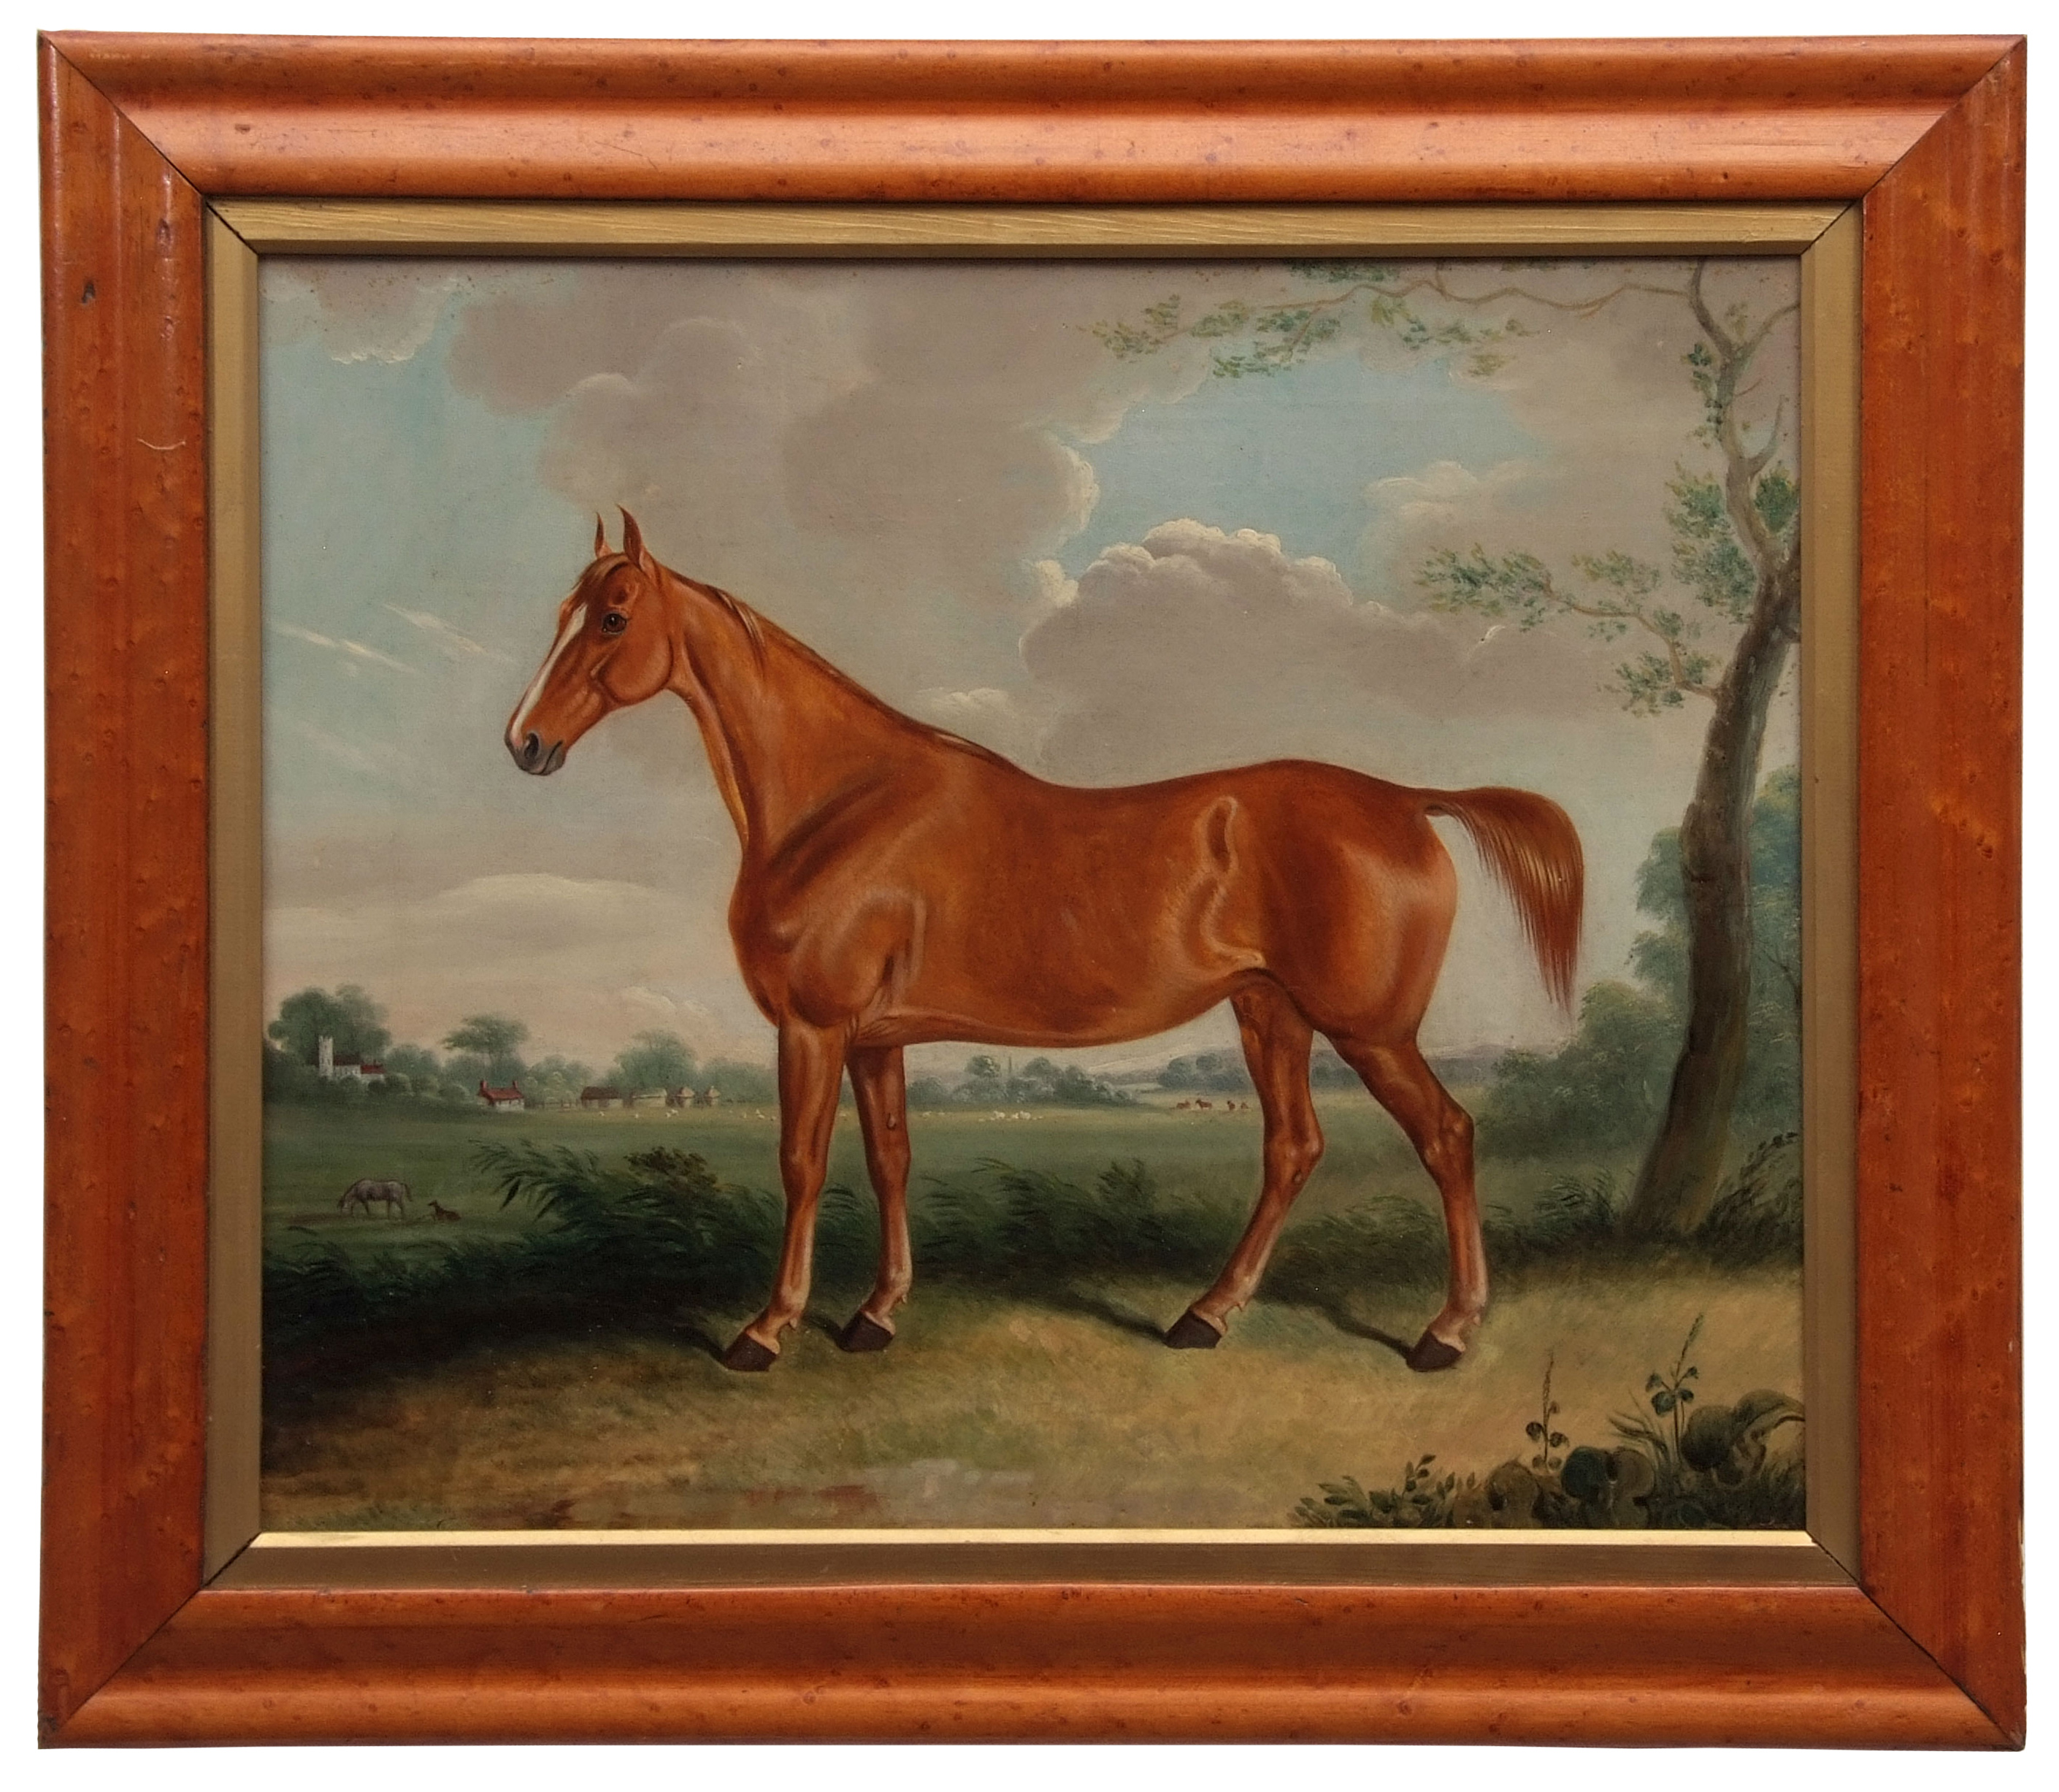 CORNELIUS JANSEN WALTER WINTER (1817-1891) Horse in landscape oil on canvas, signed and dated 1844